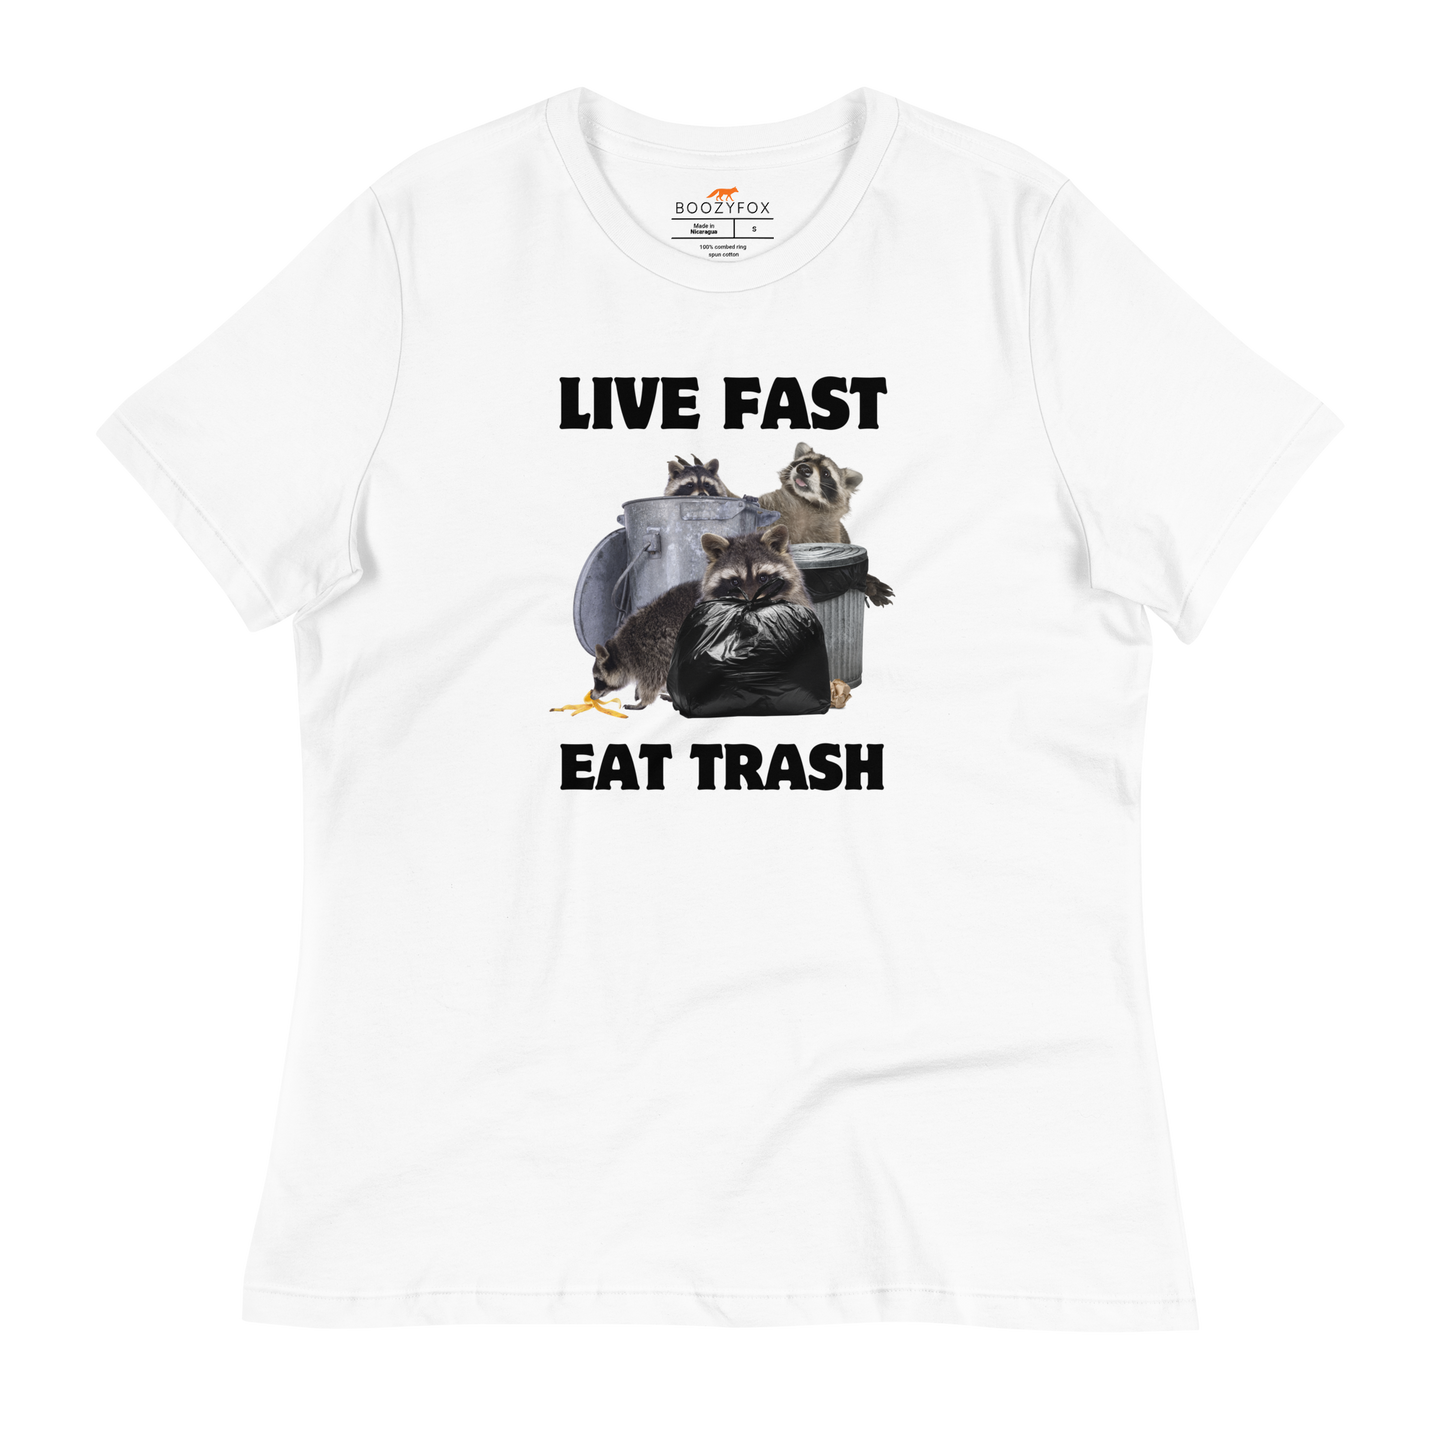 Women's White Raccoon T-Shirt featuring a hilarious Live Fast Eat Trash graphic on the chest - Women's Funny Graphic Raccoon Tees - Boozy Fox